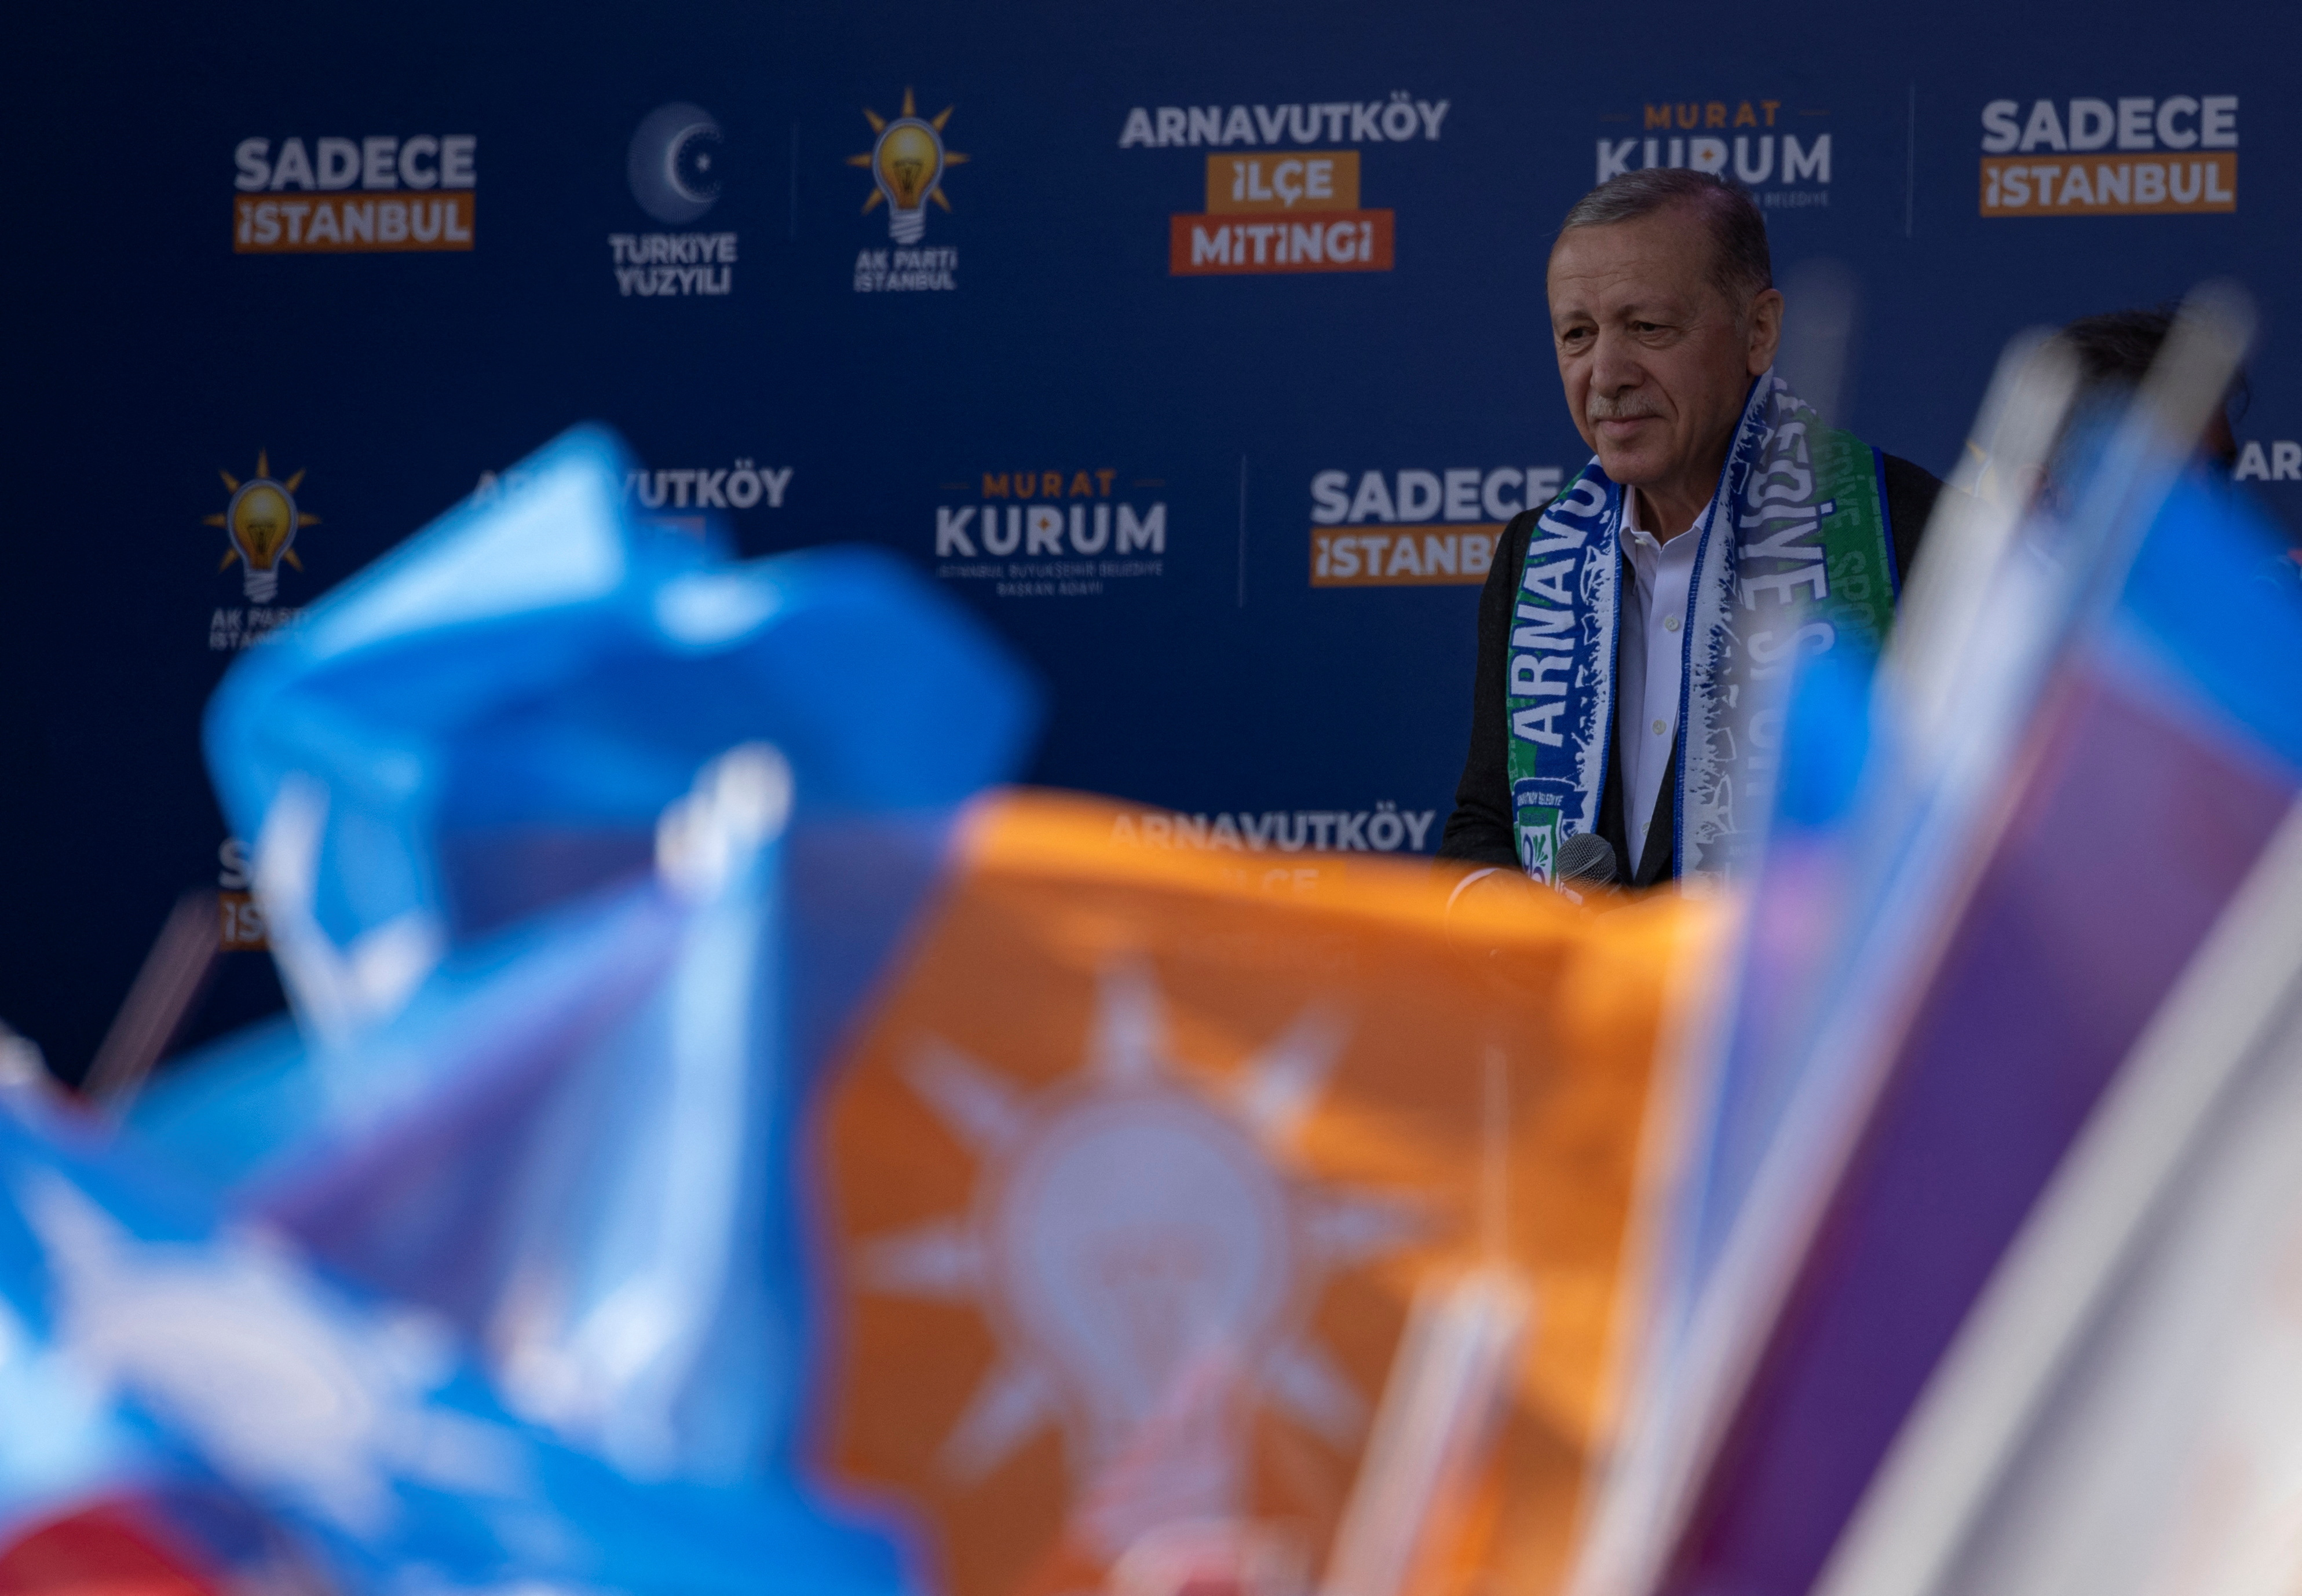 Turkish President Tayyip Erdogan reacts as he addresses his supporters during a rally ahead of the local elections in Istanbul